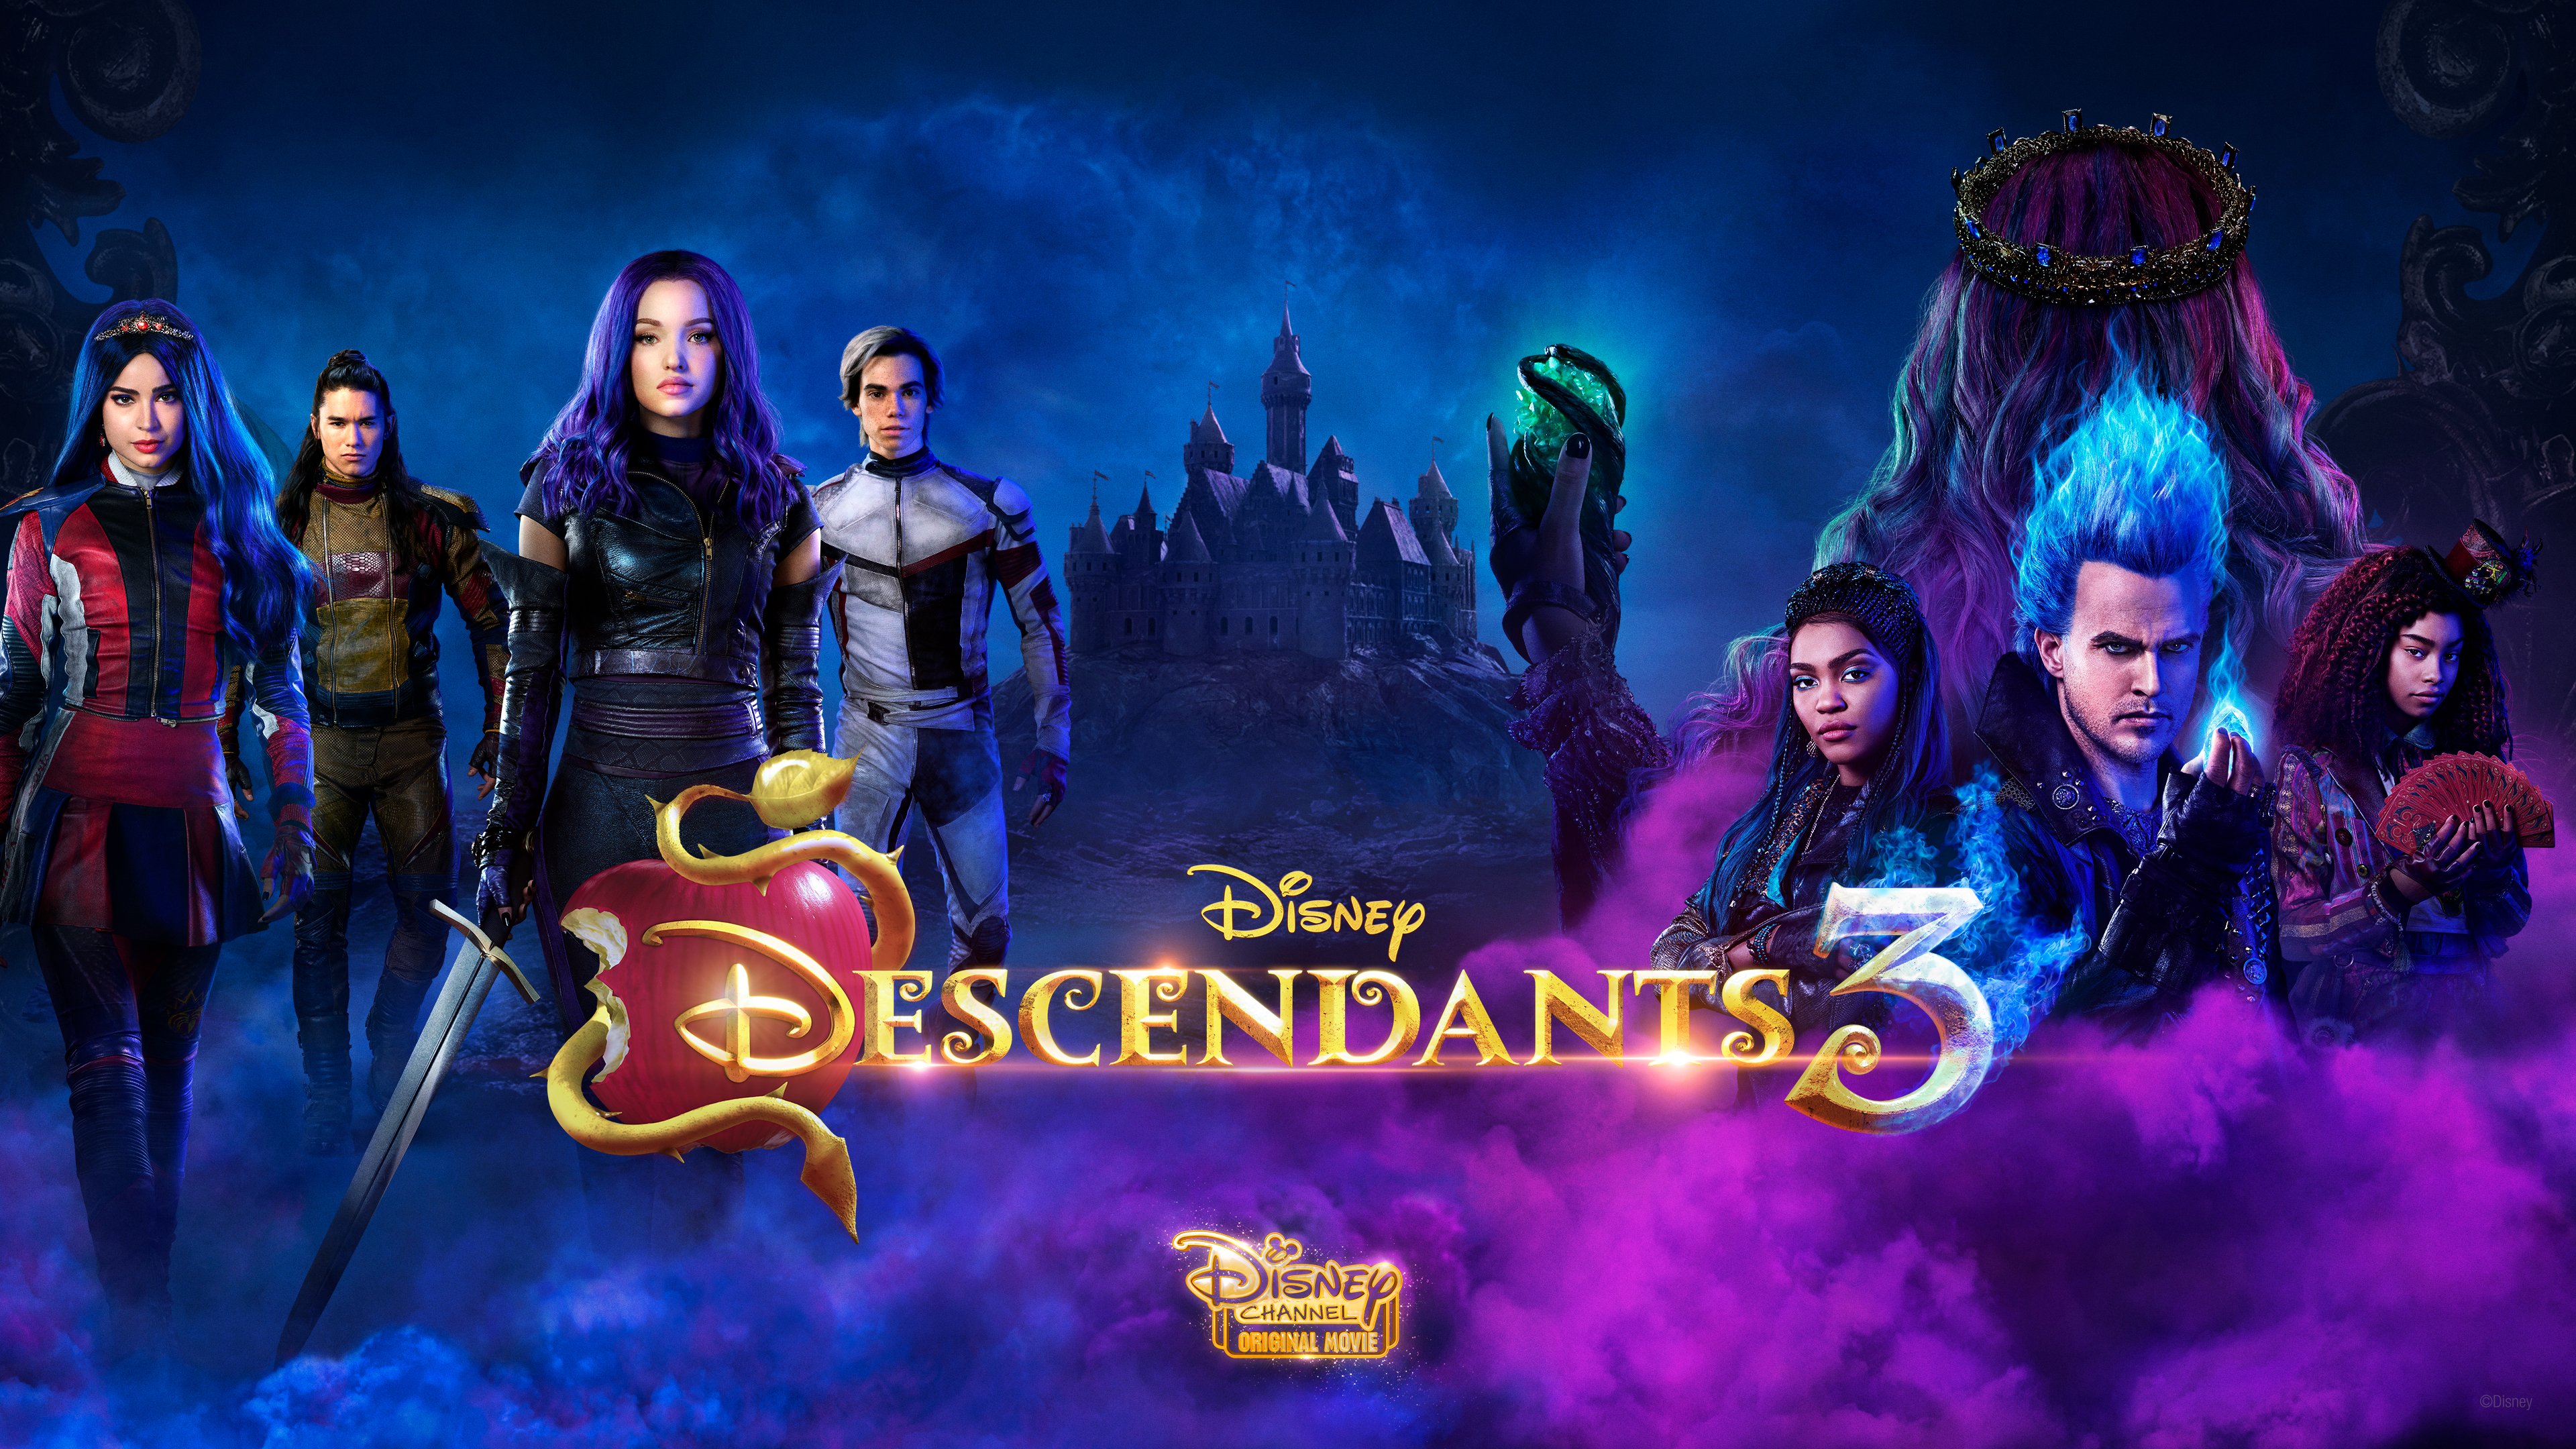 Disney's 'Descendants 2' To Premiere On Five Networks At Once